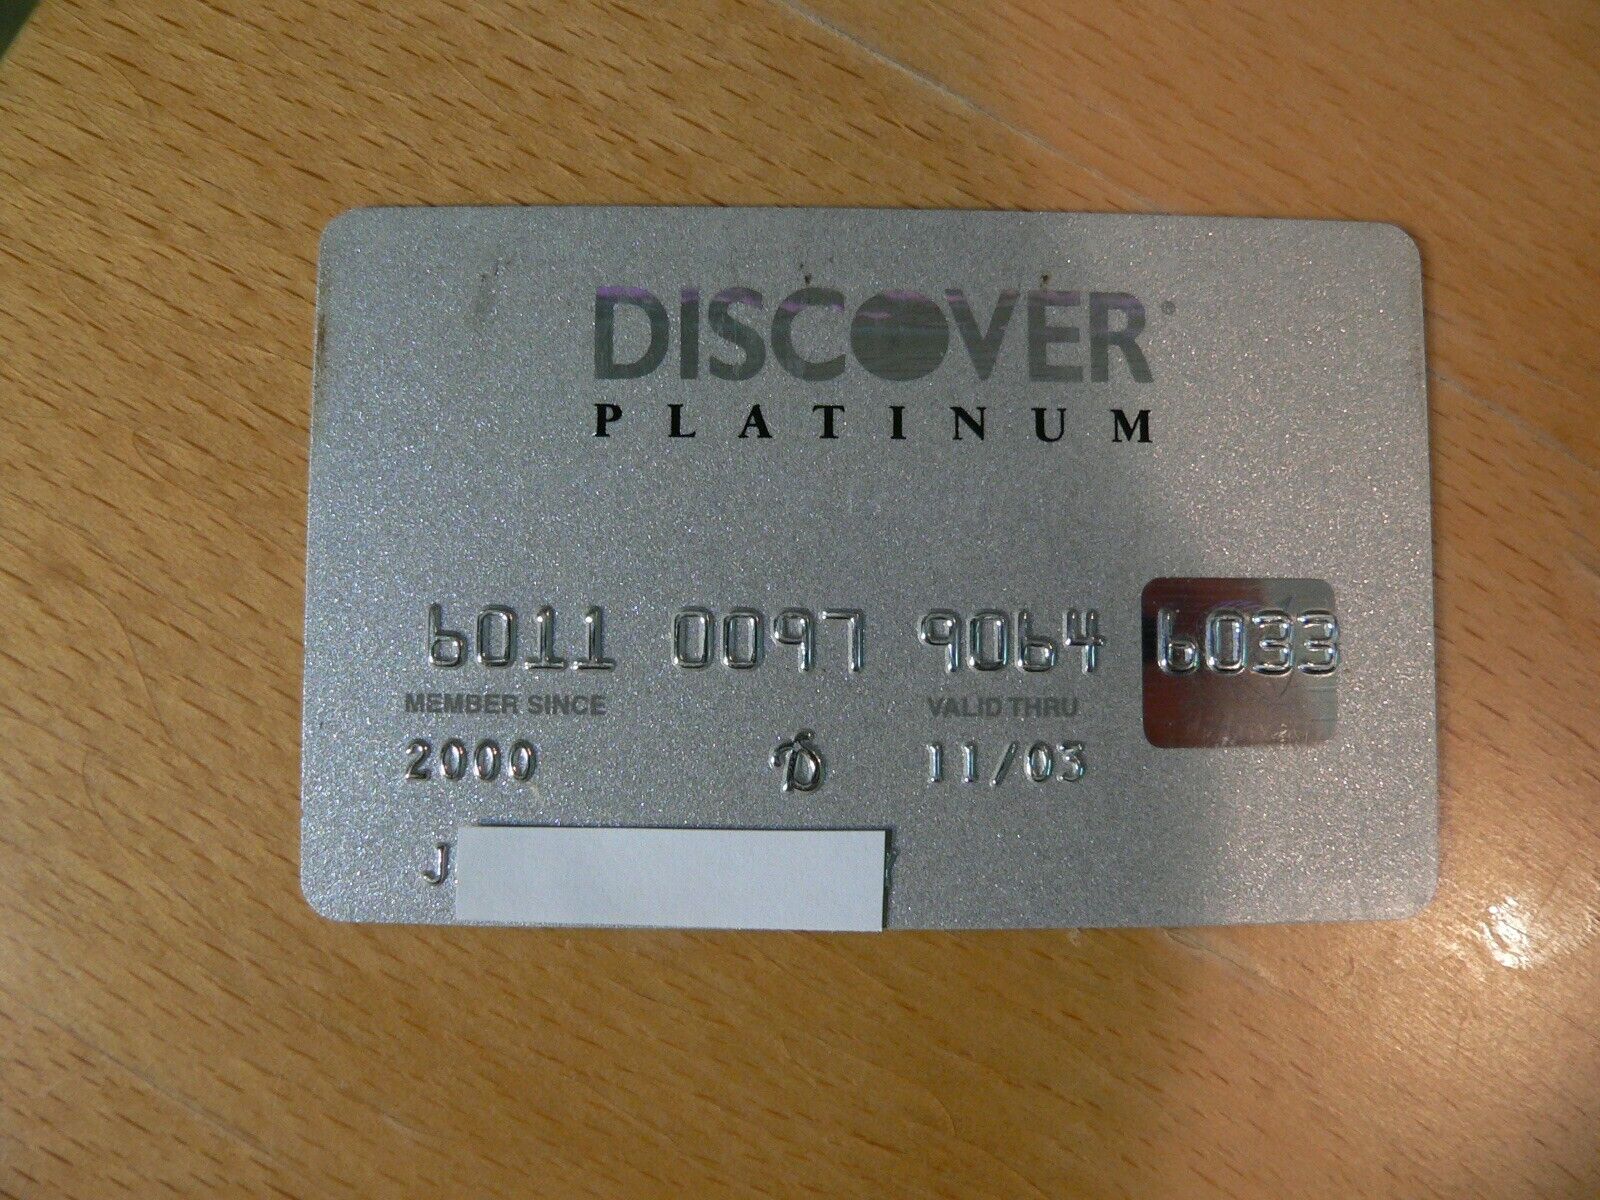 Vintage Discover Platinum Credit Card Expired in 2003